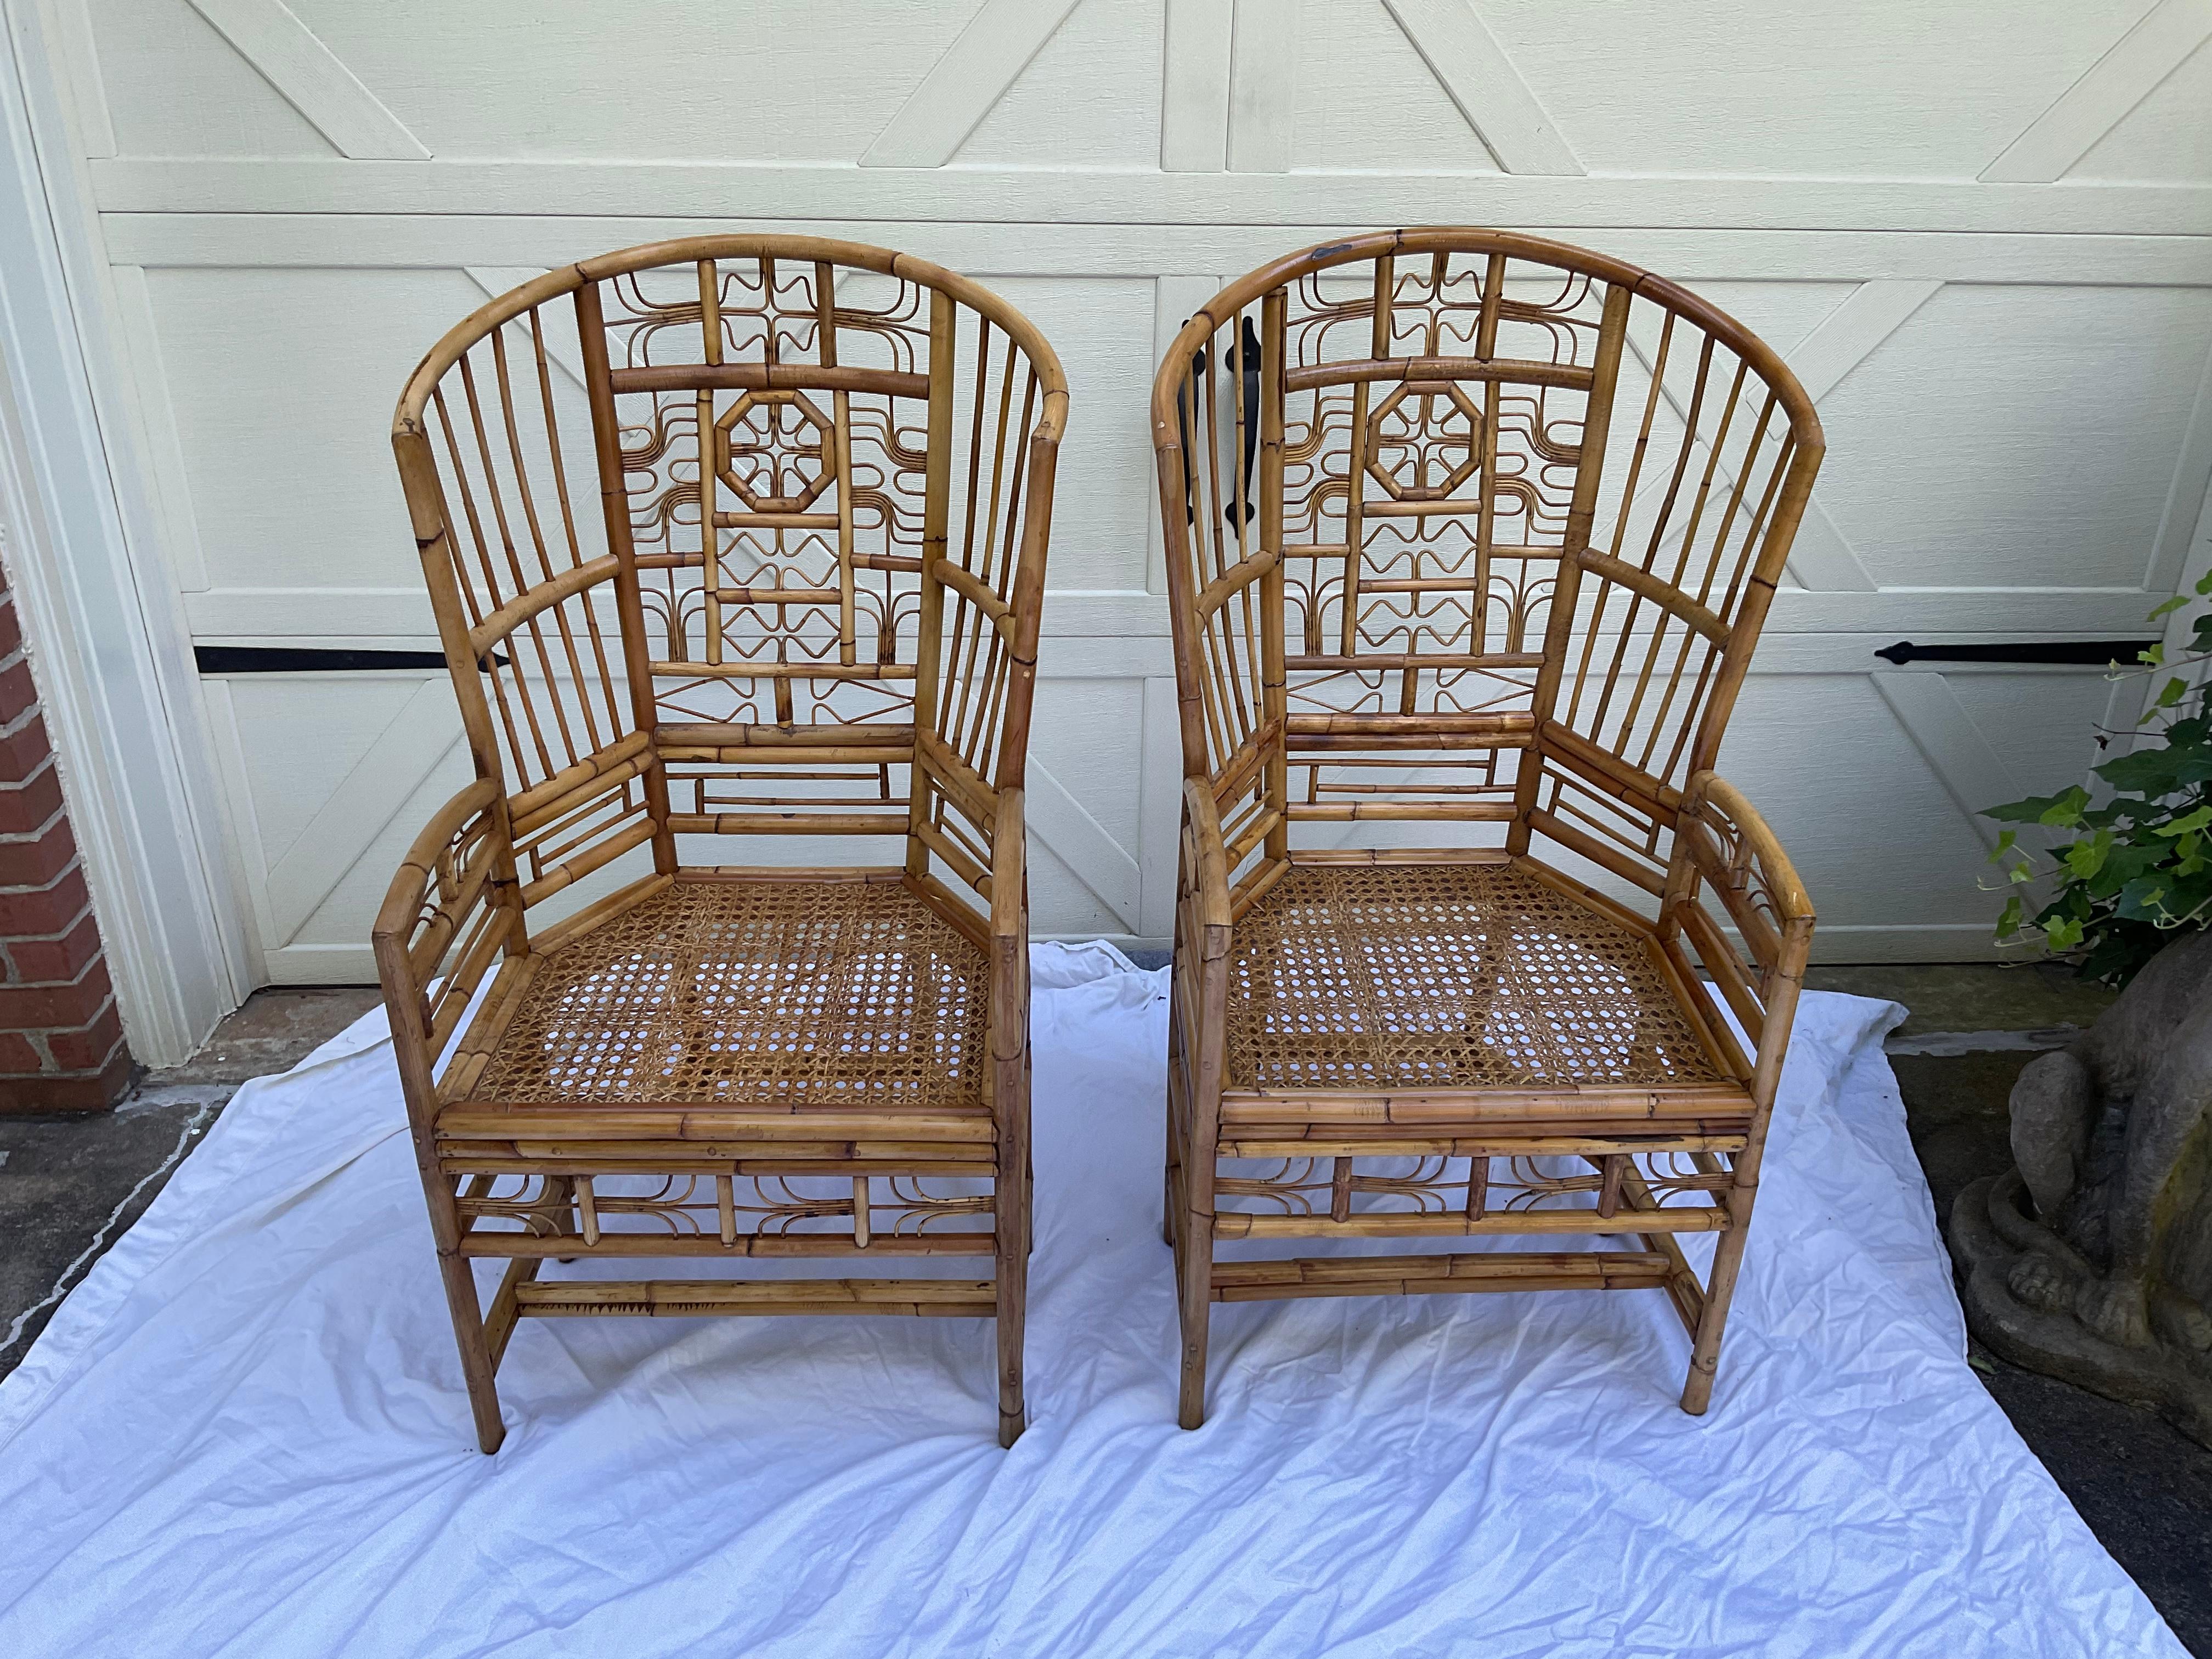 I said , I would not buy any more rattan chairs, but this pair is so different! I have never seen before! . It’s a cross between a traditional Brighton style chair, and a peacock chair. Both are in very good condition. Cane is intact on both, but